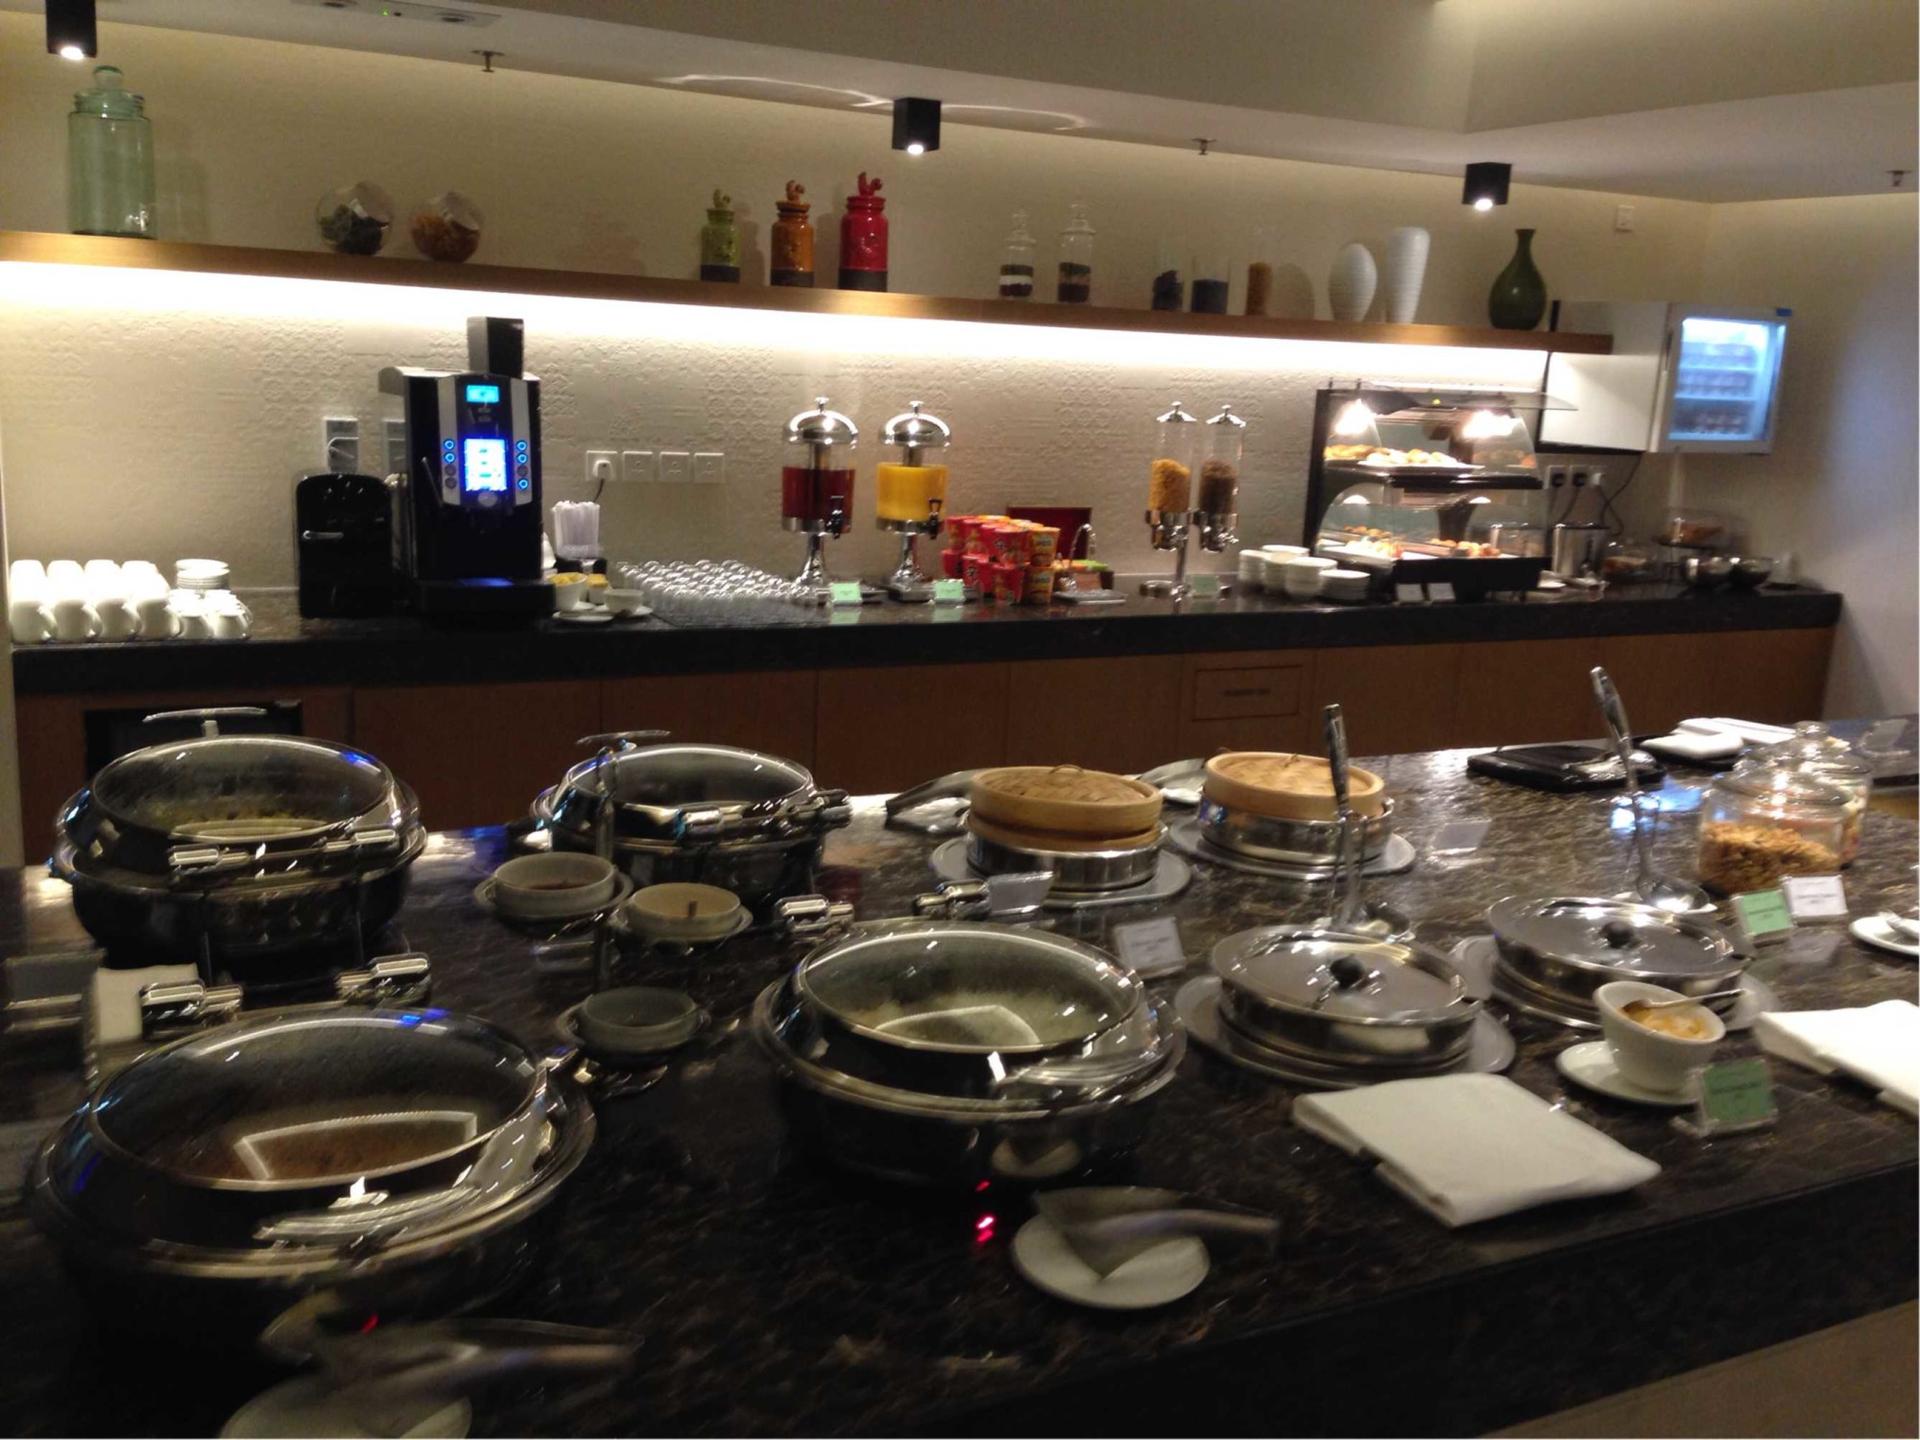 Singapore Airlines SilverKris Business Class Lounge image 22 of 68